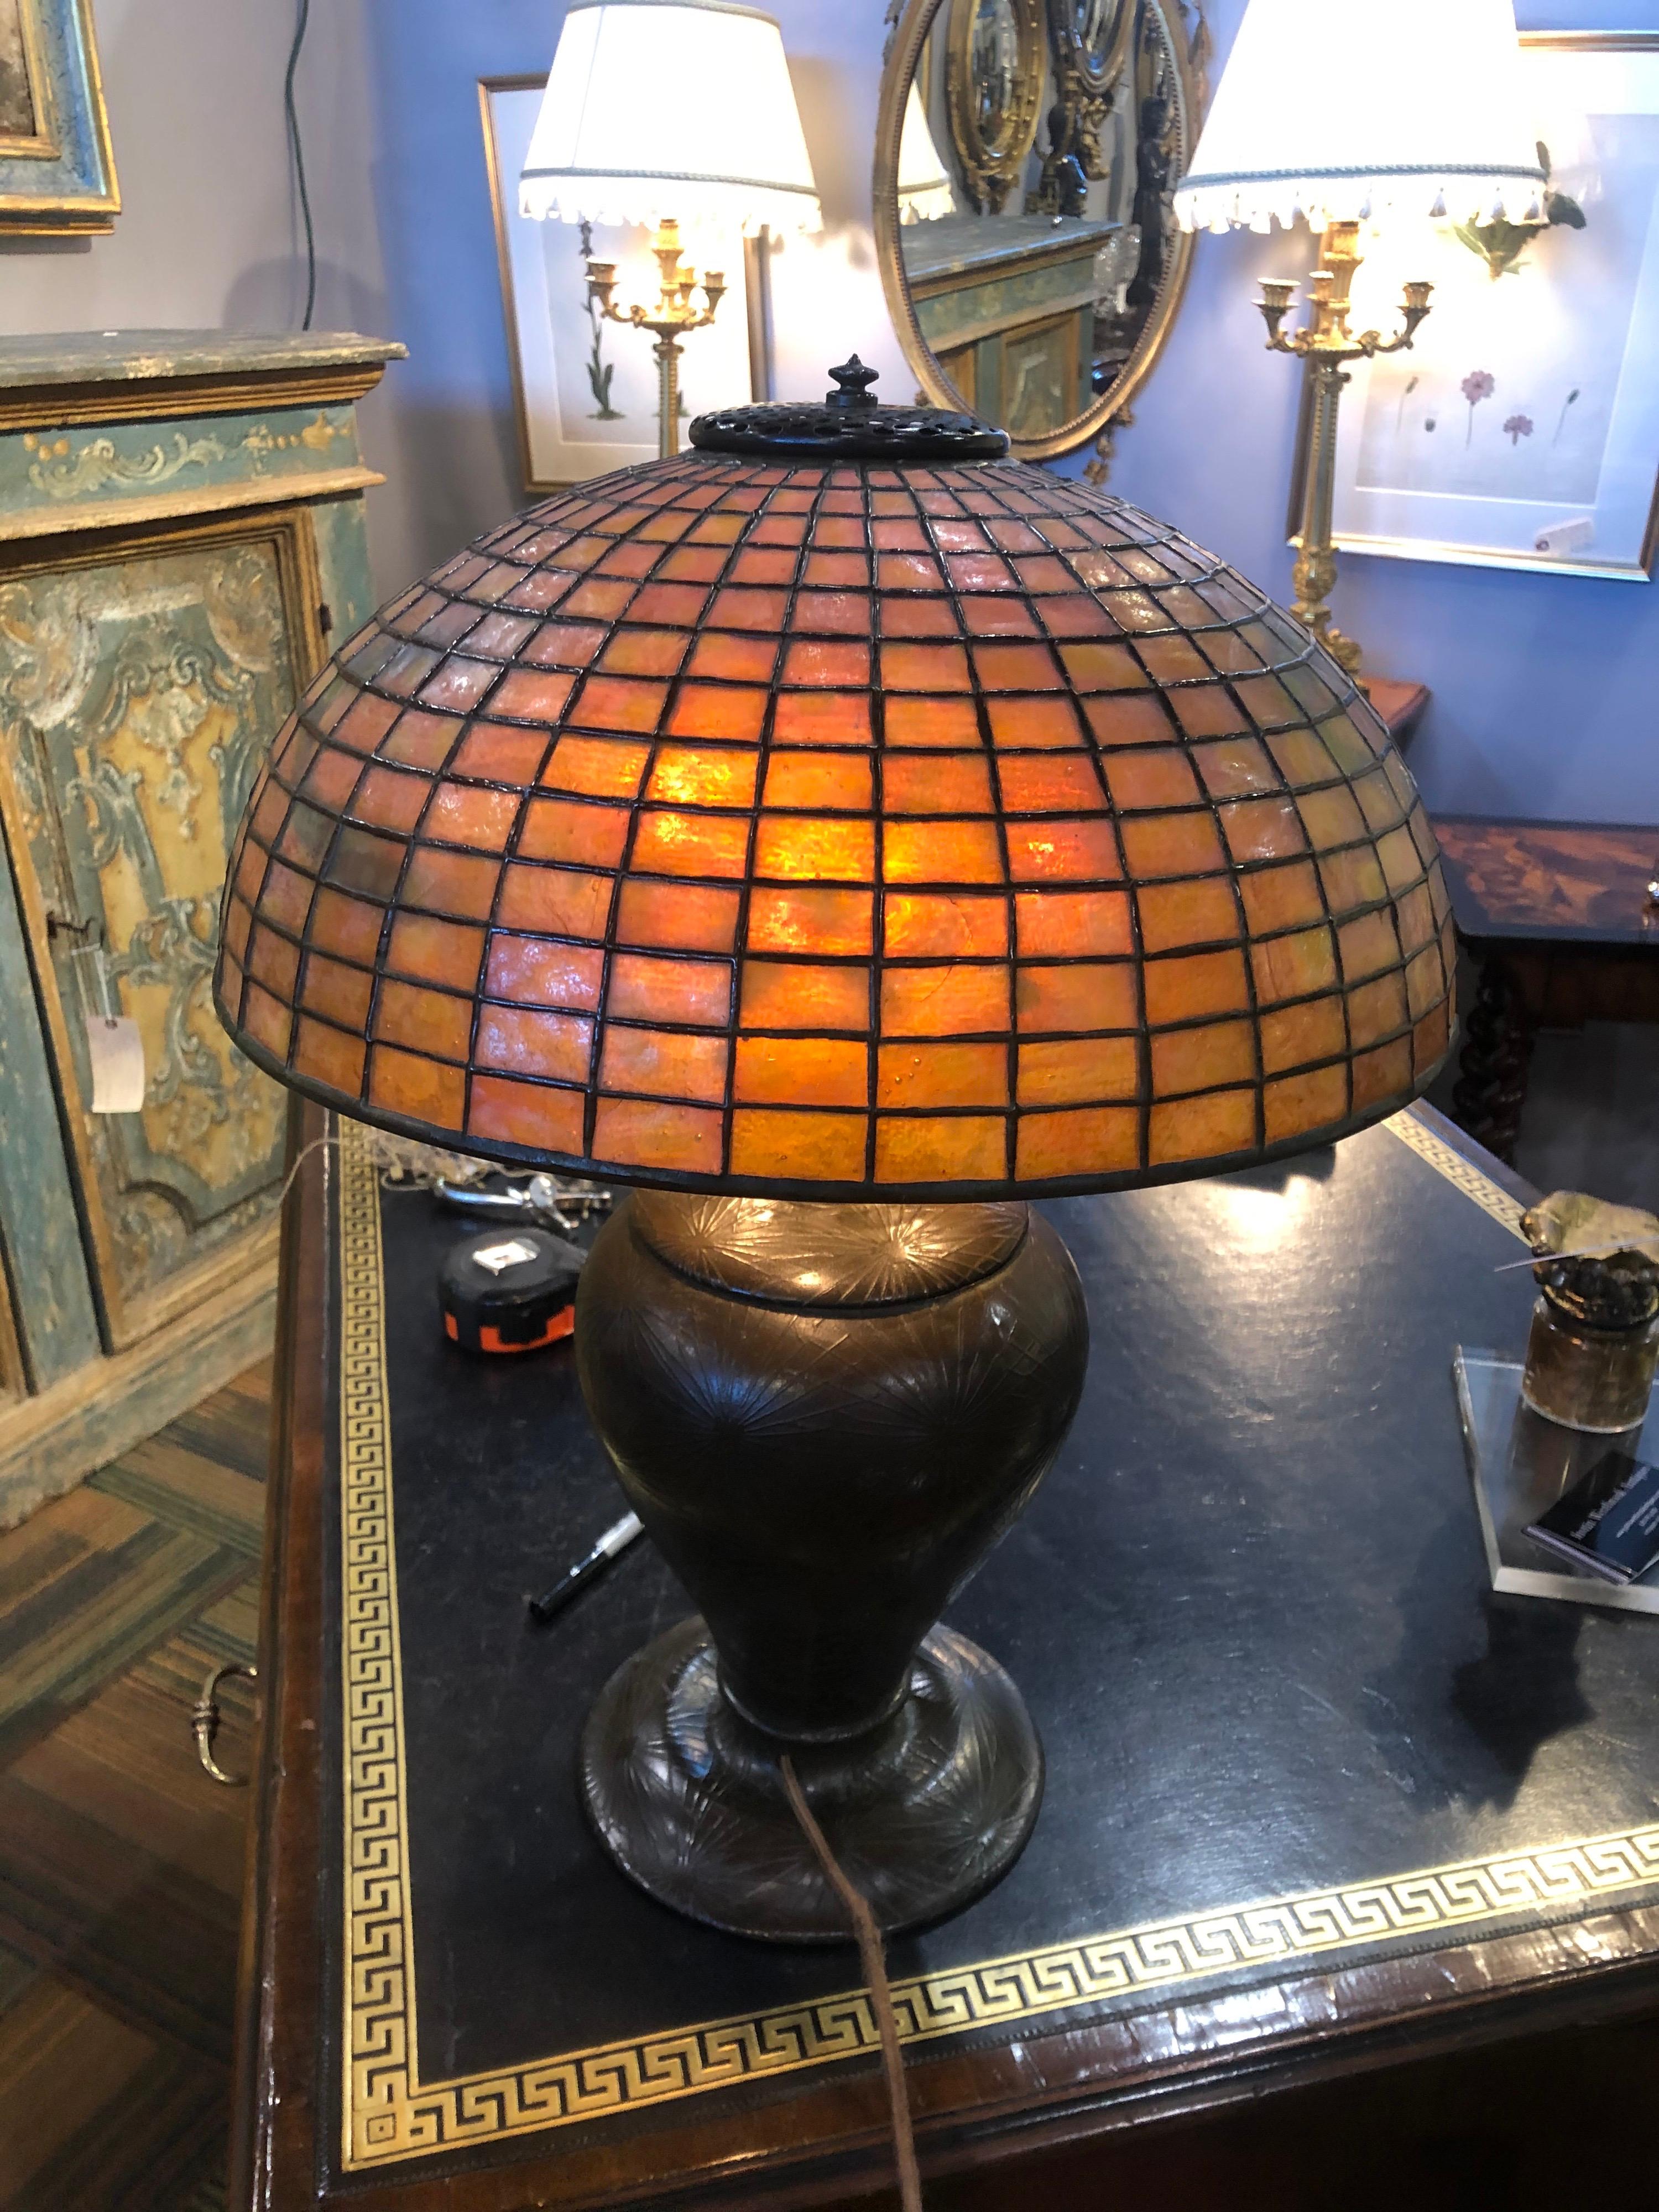 Signed Tiffany & Co. lamp- pine needle base with an intact amber colored geometric shade. Stamped “Tiffany Studios New York 1436” on a pine needle base stamped “D443 19”.